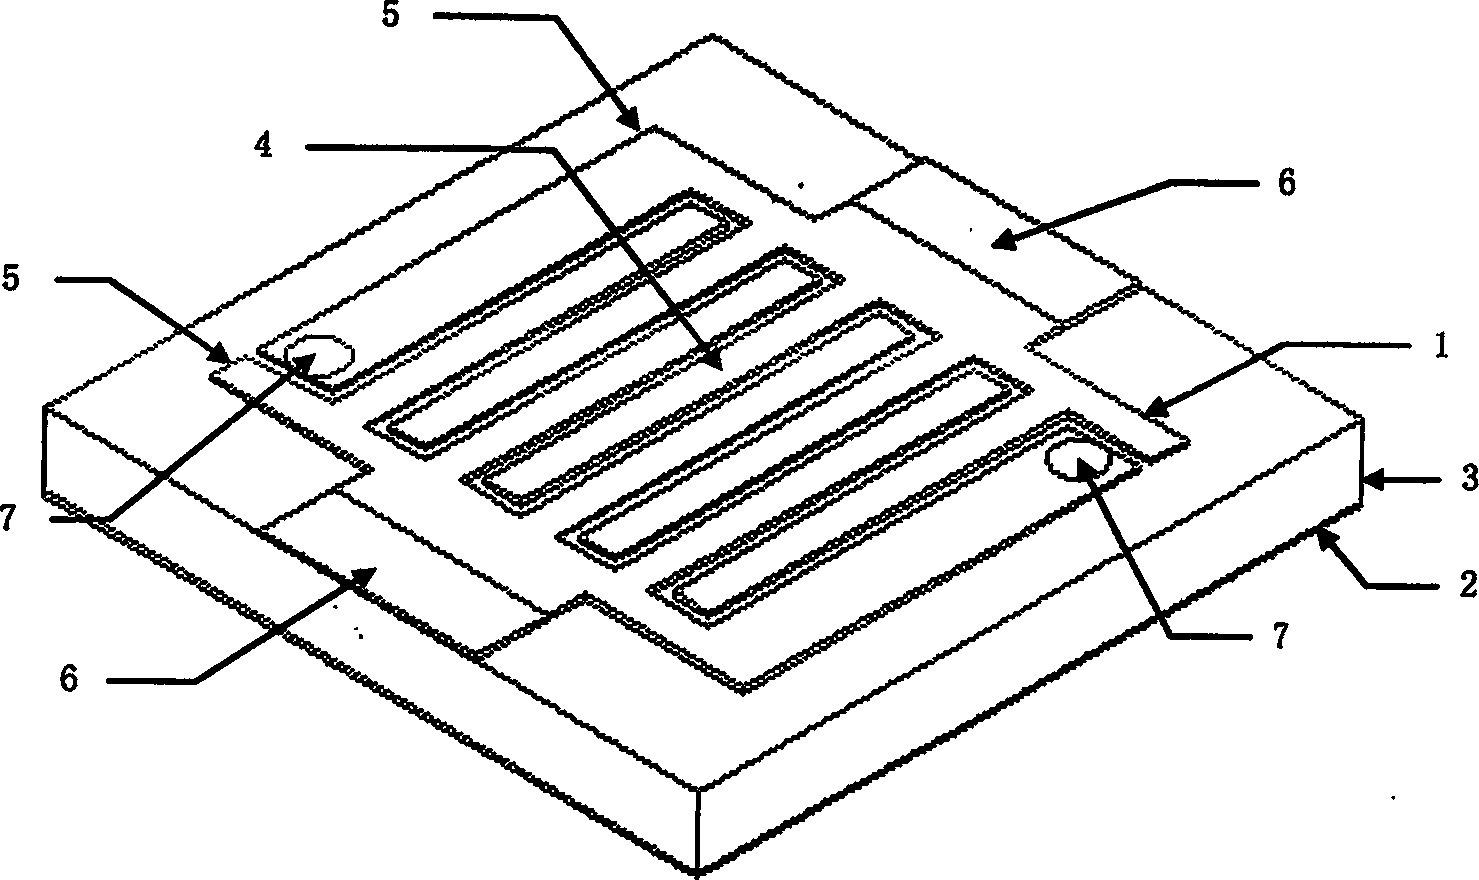 Left hand microstrip transmission line, and time delay line structured based on the transmission line